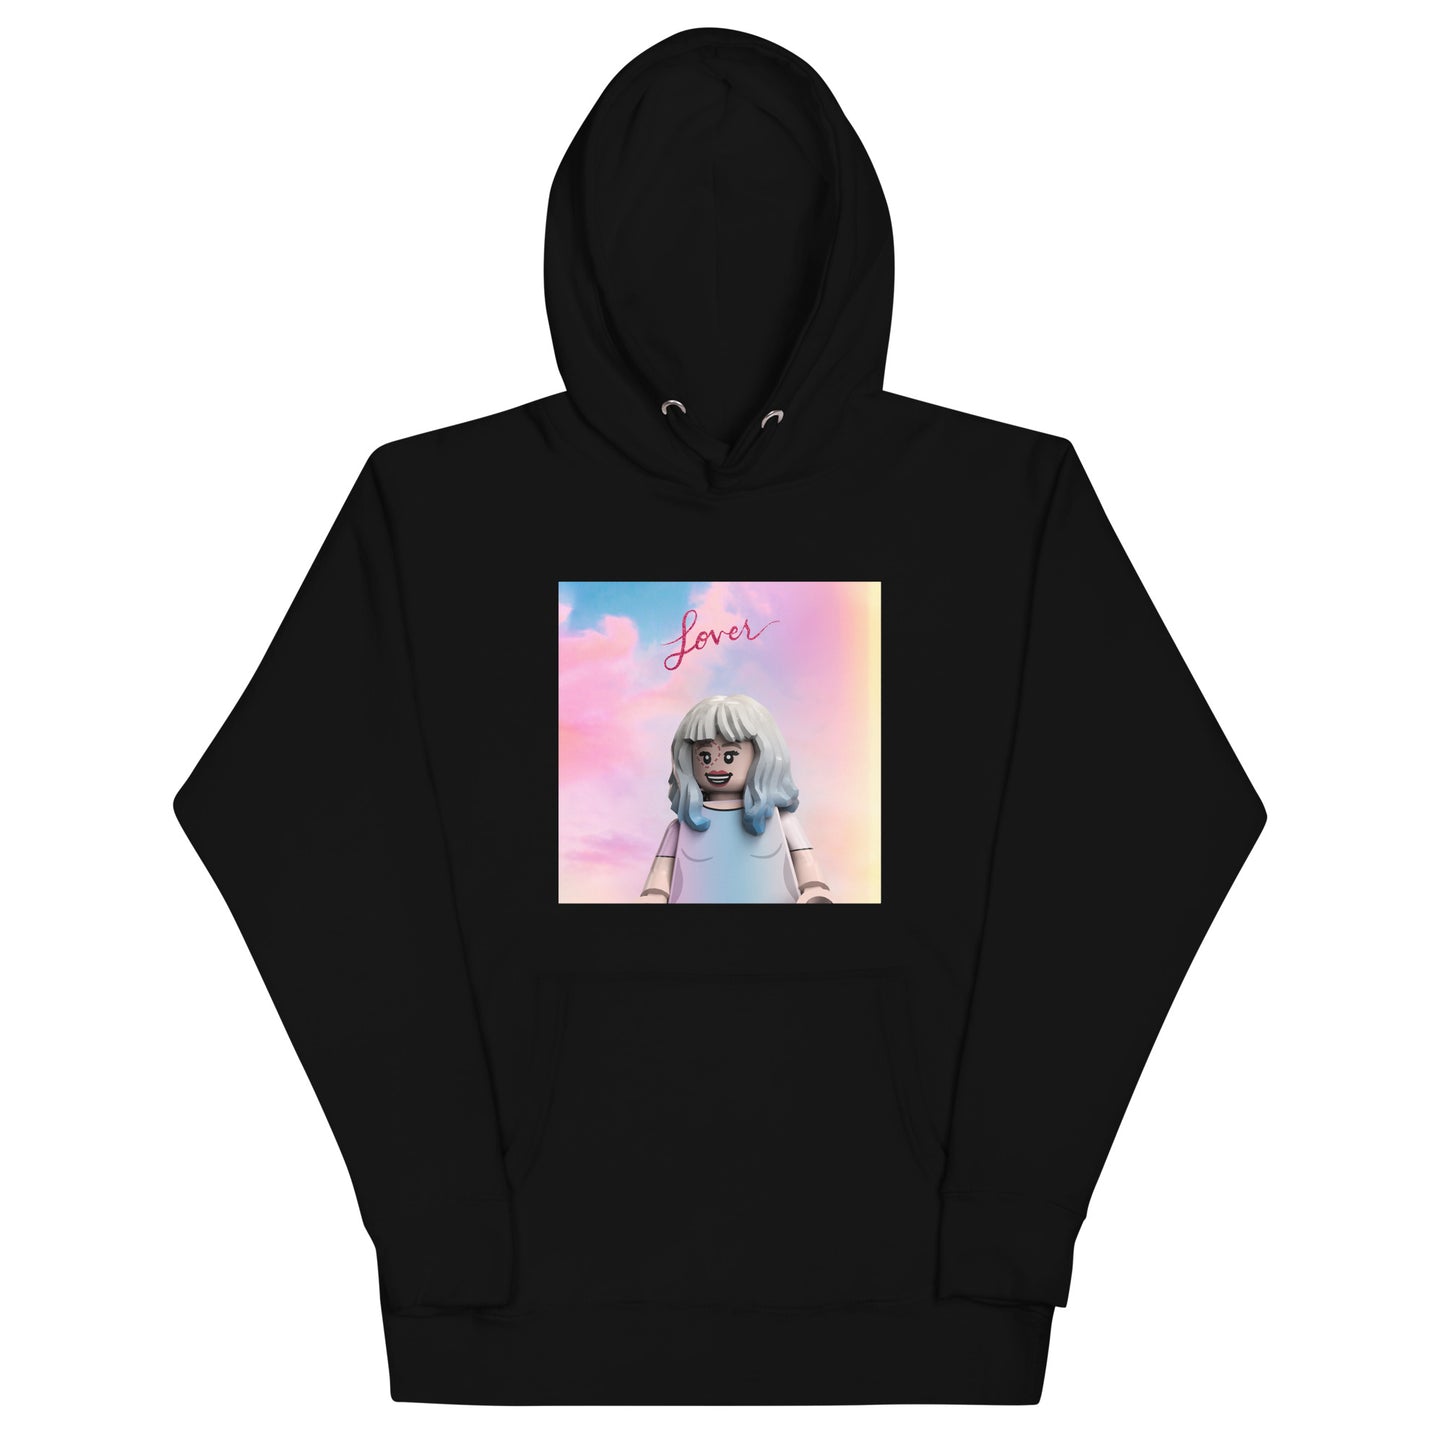 Taylor Swift The Lover Album Black Hoodie - Size LARGE - Tracklist, UR MY  LOVER